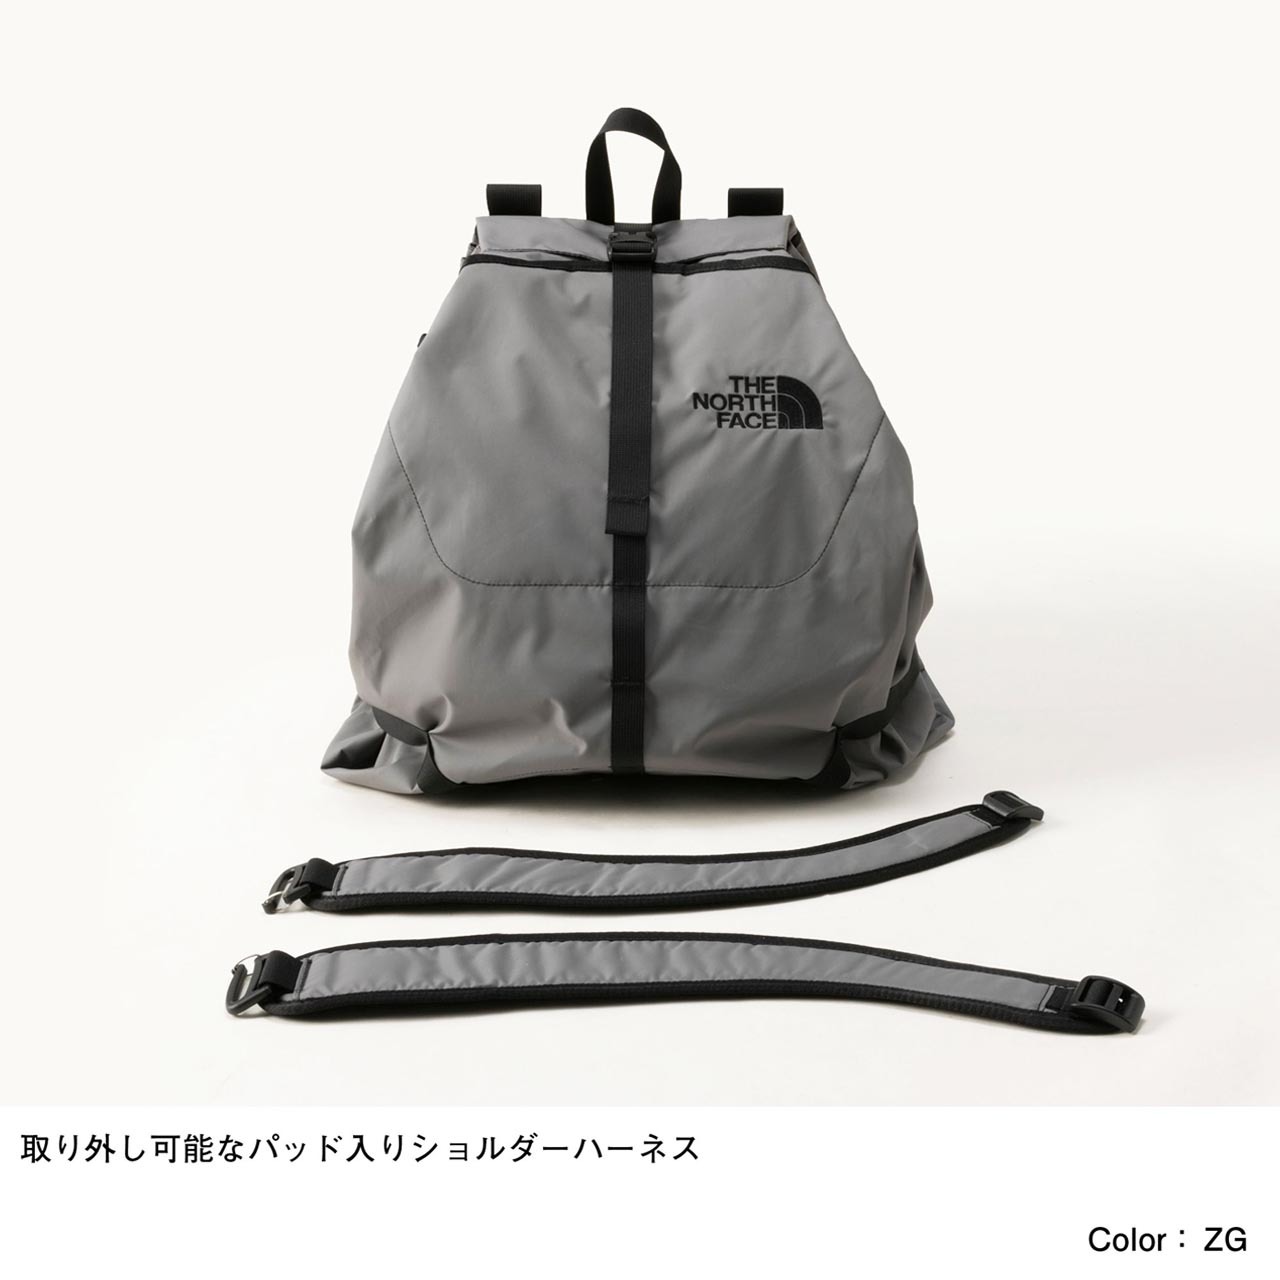 THE NORTH FACE [ザ・ノース・フェイス] Escape Pack [NM82230]_f0051306_08000169.jpg